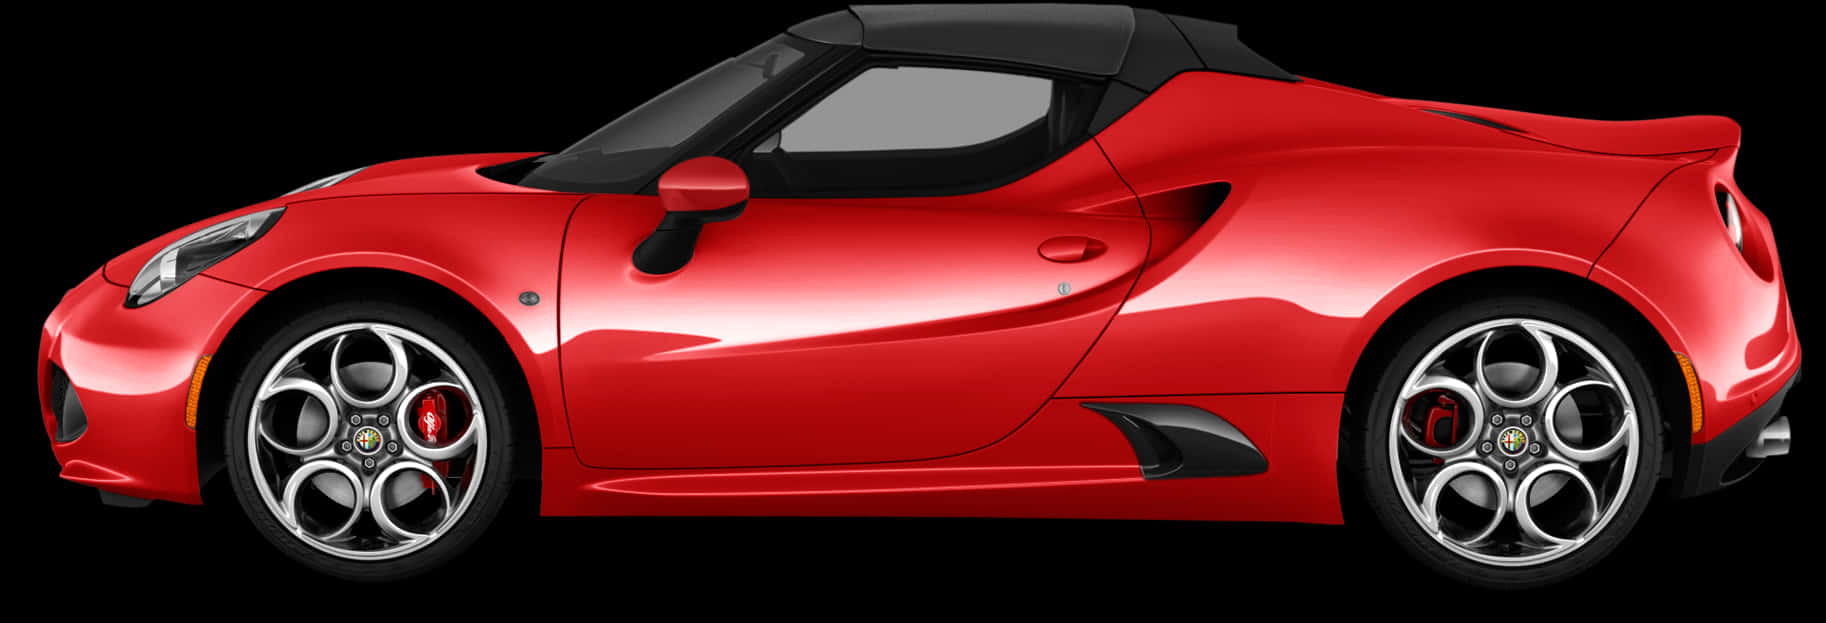 Red Sports Car Side View PNG image